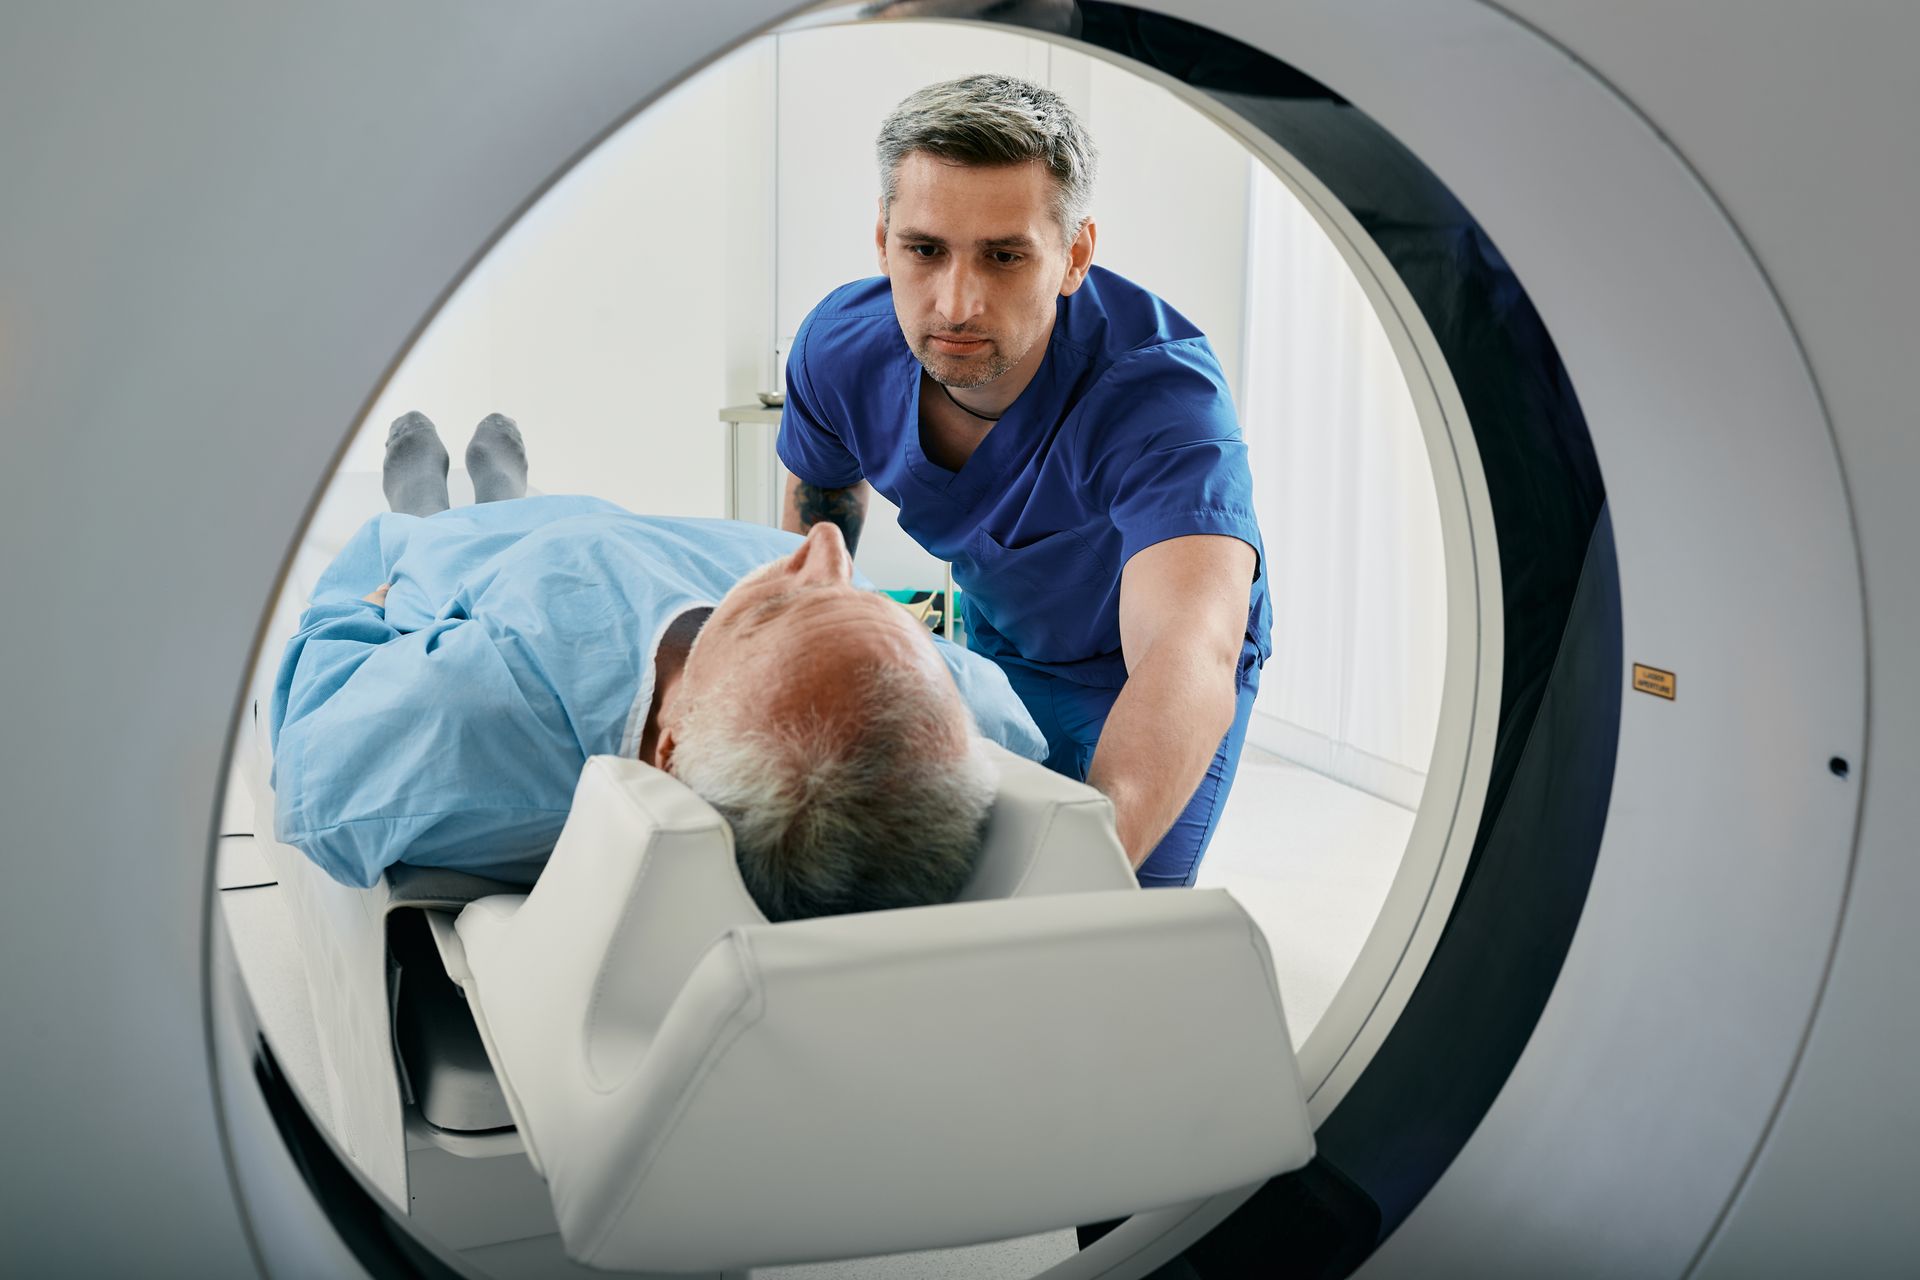 A man is getting a ct scan in a hospital.